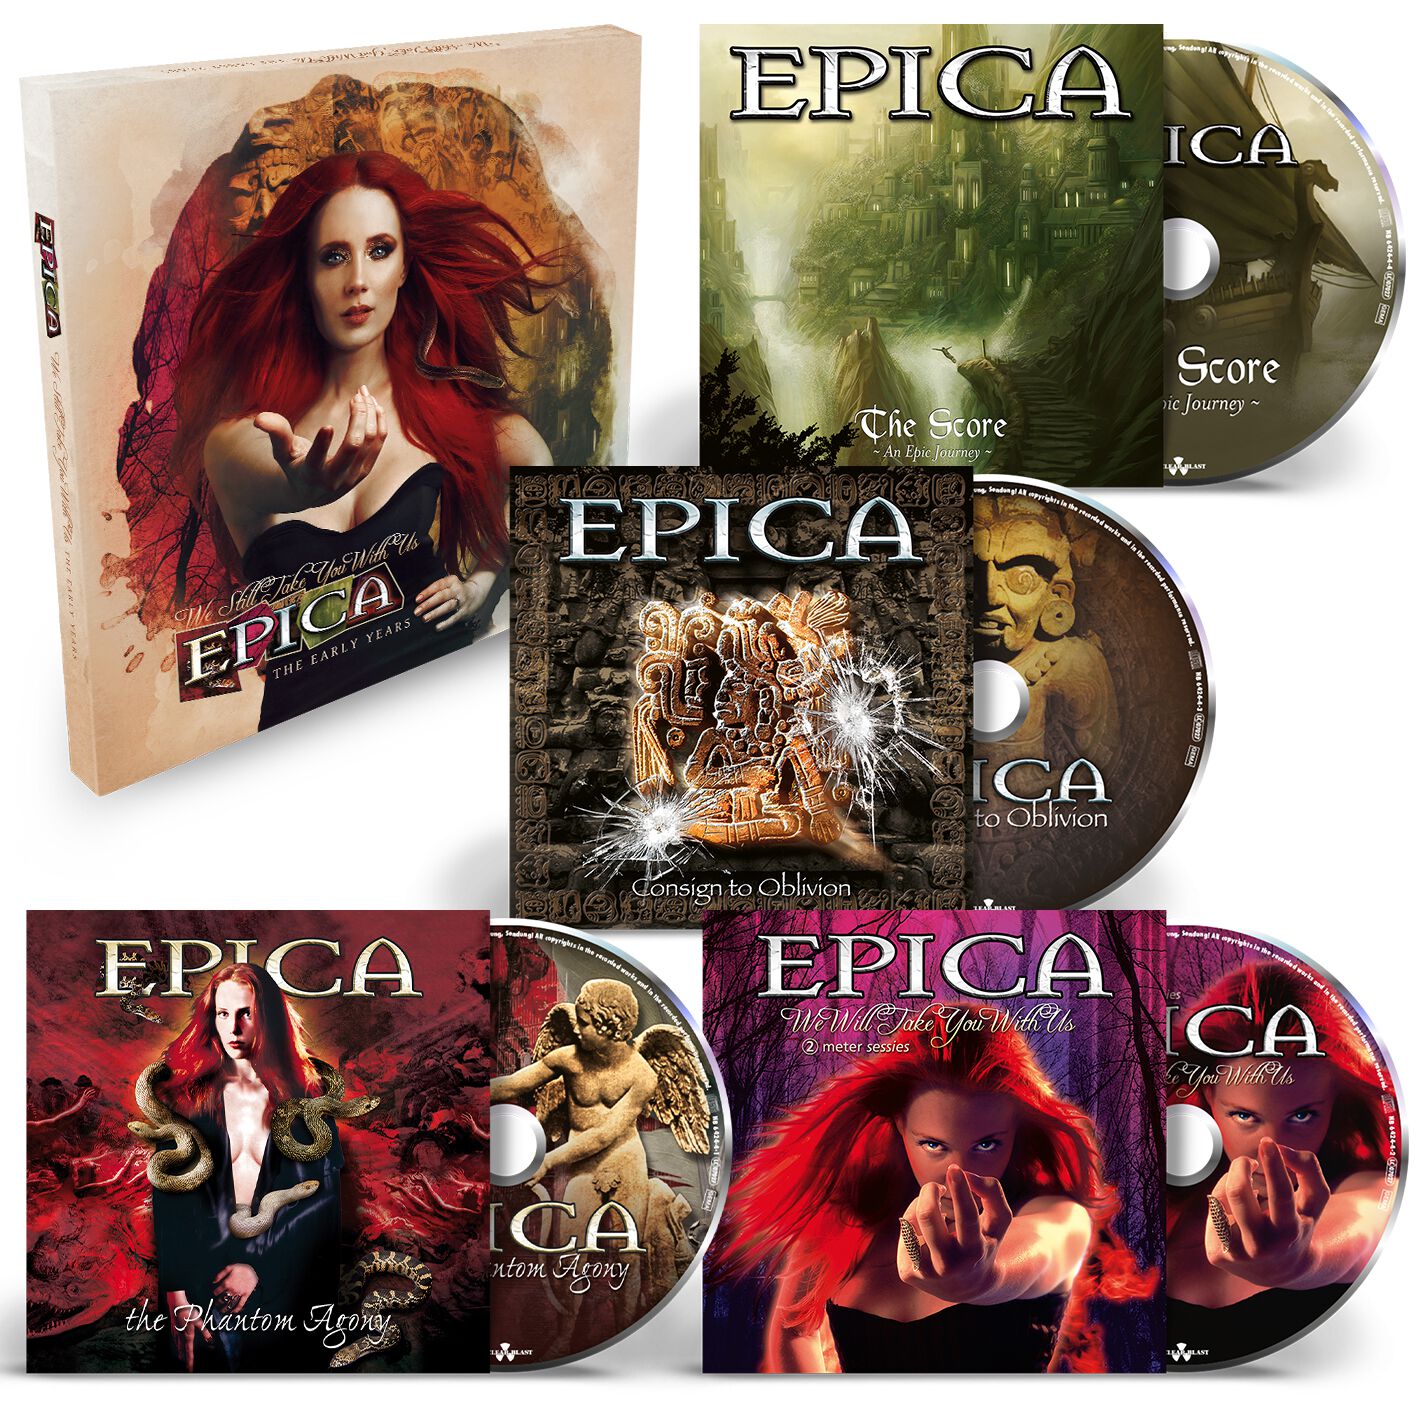 Epica We still take you with us - The early years CD multicolor